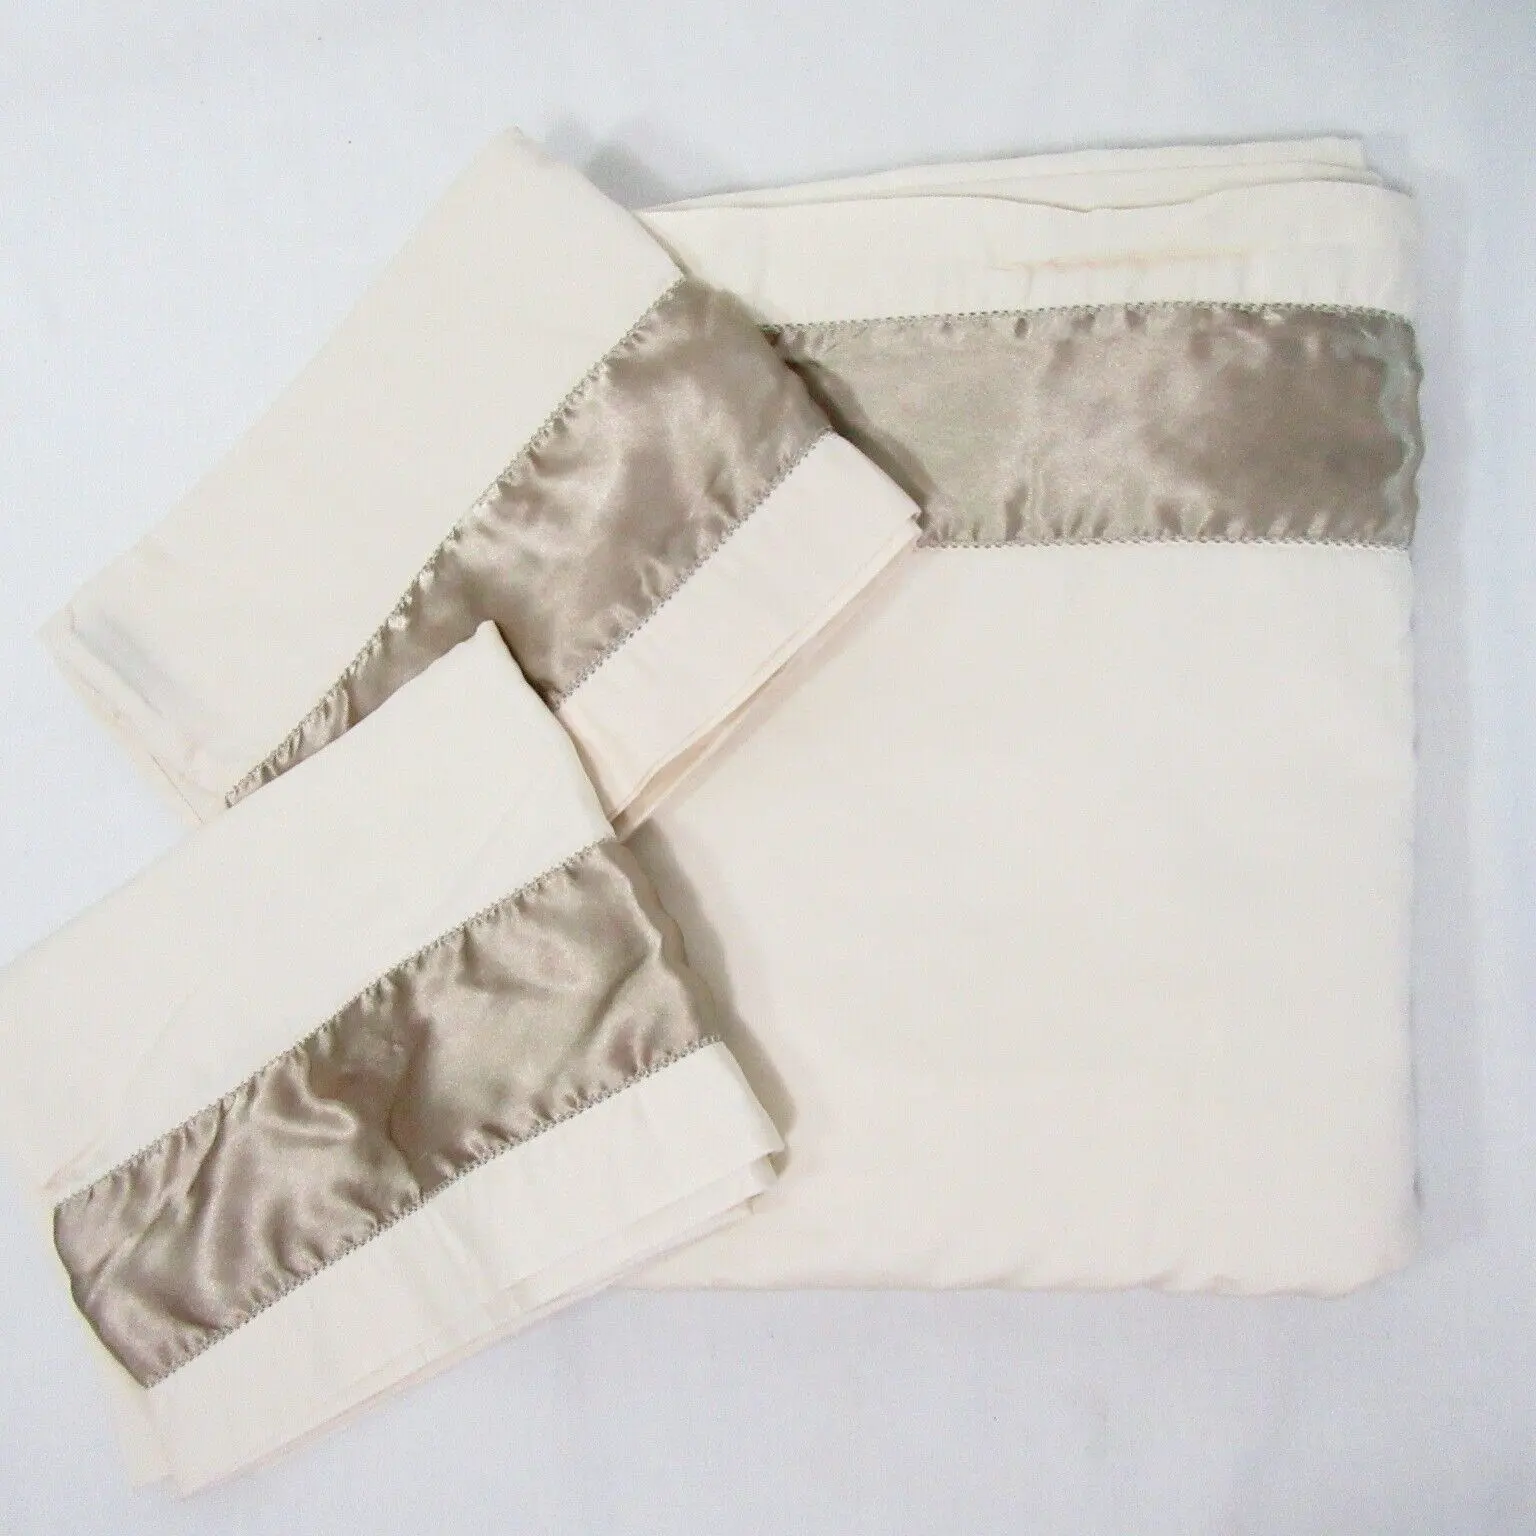 Marshall Field’s Hotel Satin Cuff 3-PC Queen Flat Sheet with Pillowcase Set - $70.00